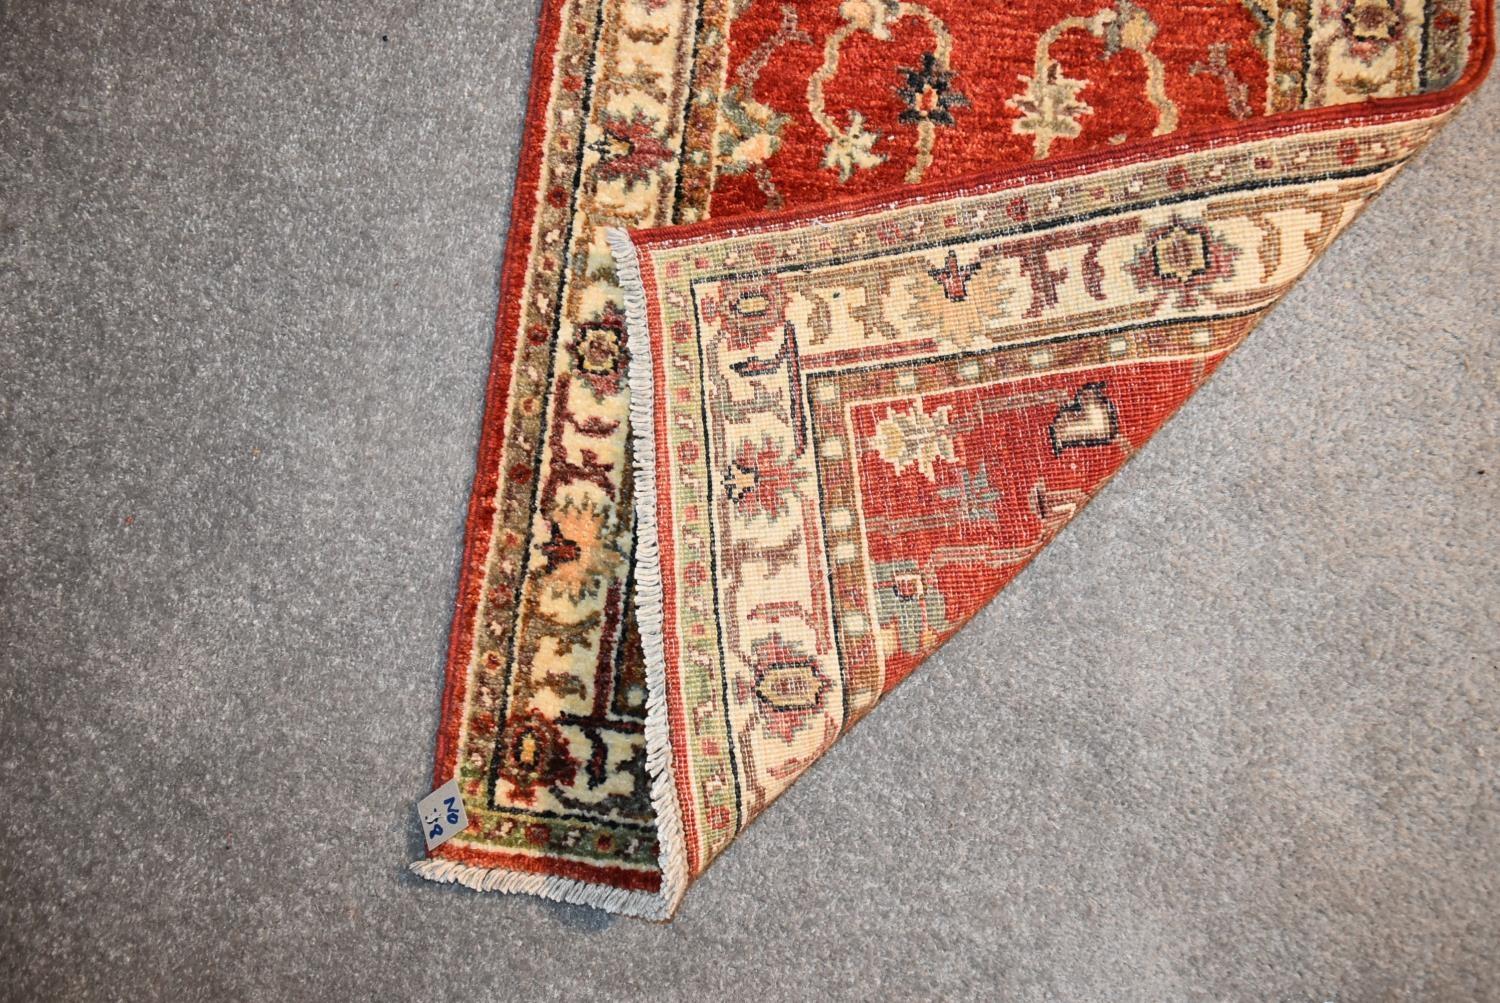 A Ziegler runner with allover scrolling floral design on a deep red field. L.335x60cm - Image 4 of 4